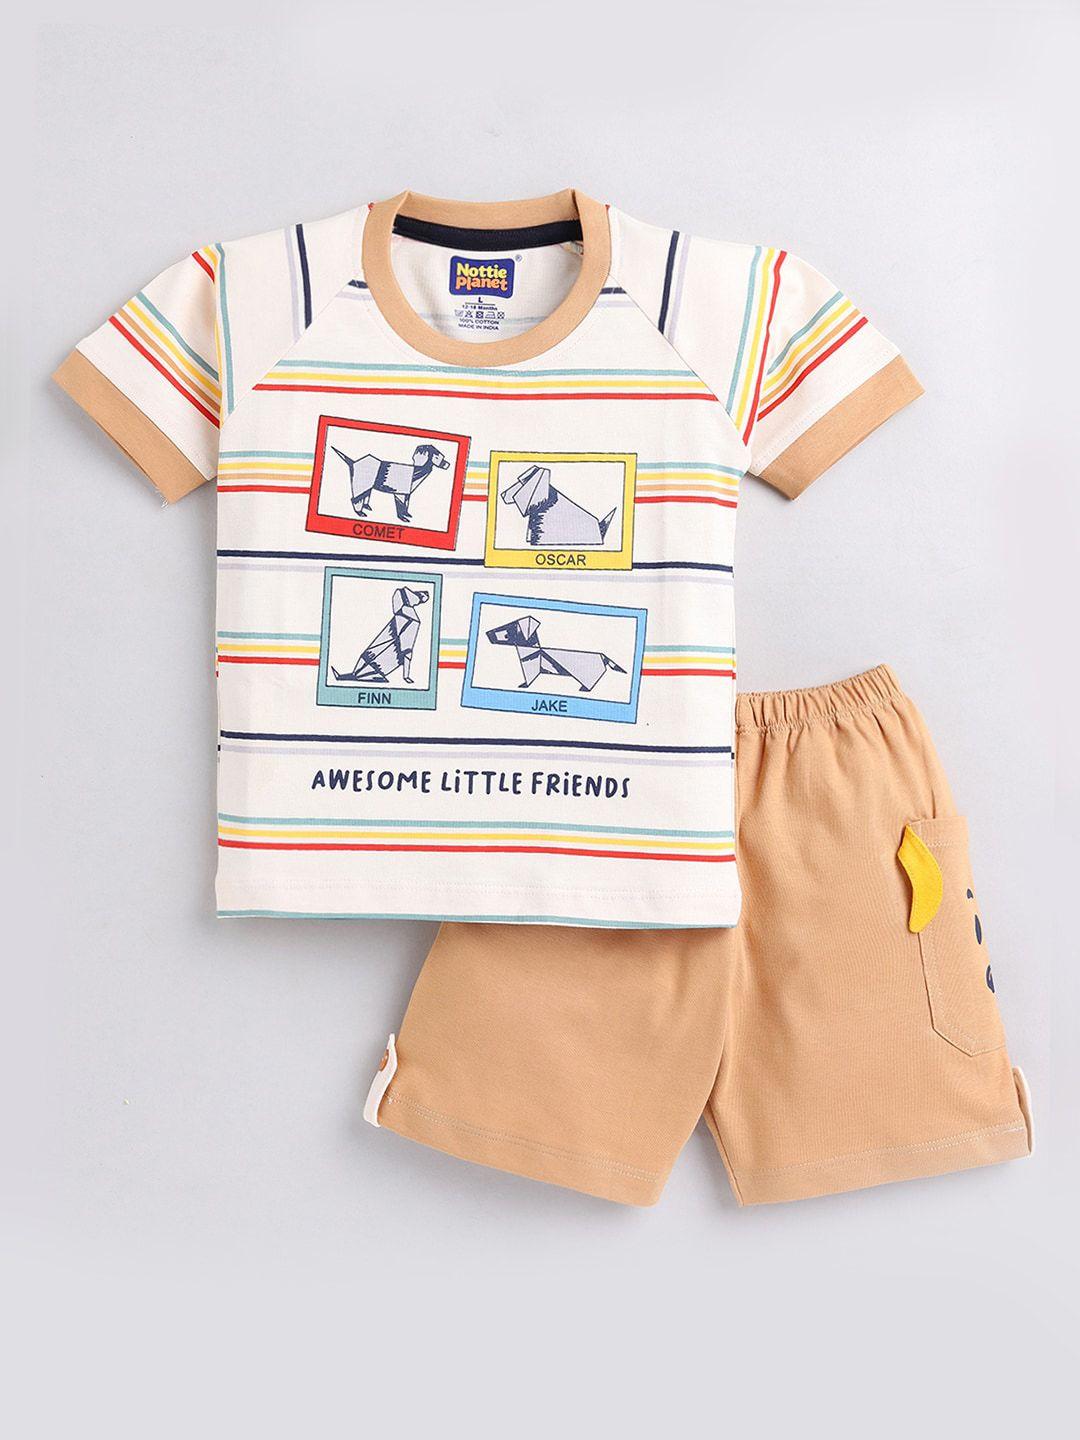 nottie planet boys dog printed cotton t-shirt with shorts set